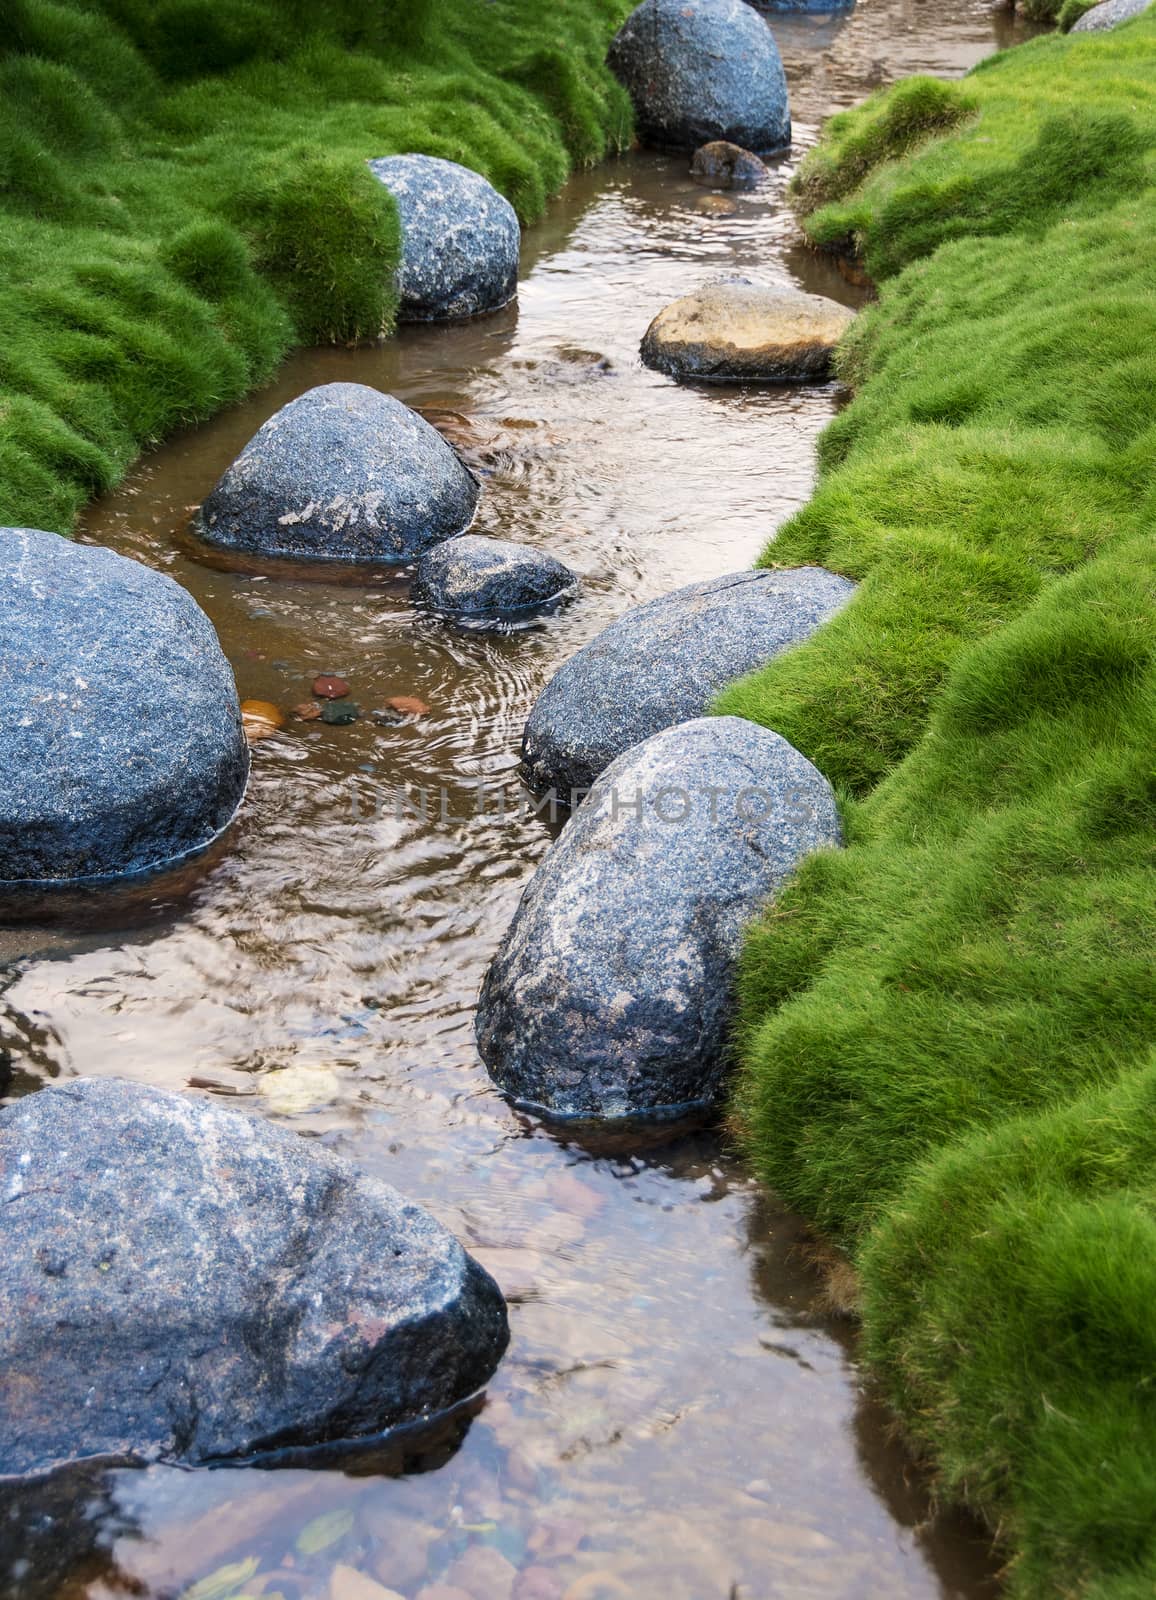 Rocks in the creek surrounded by grass.